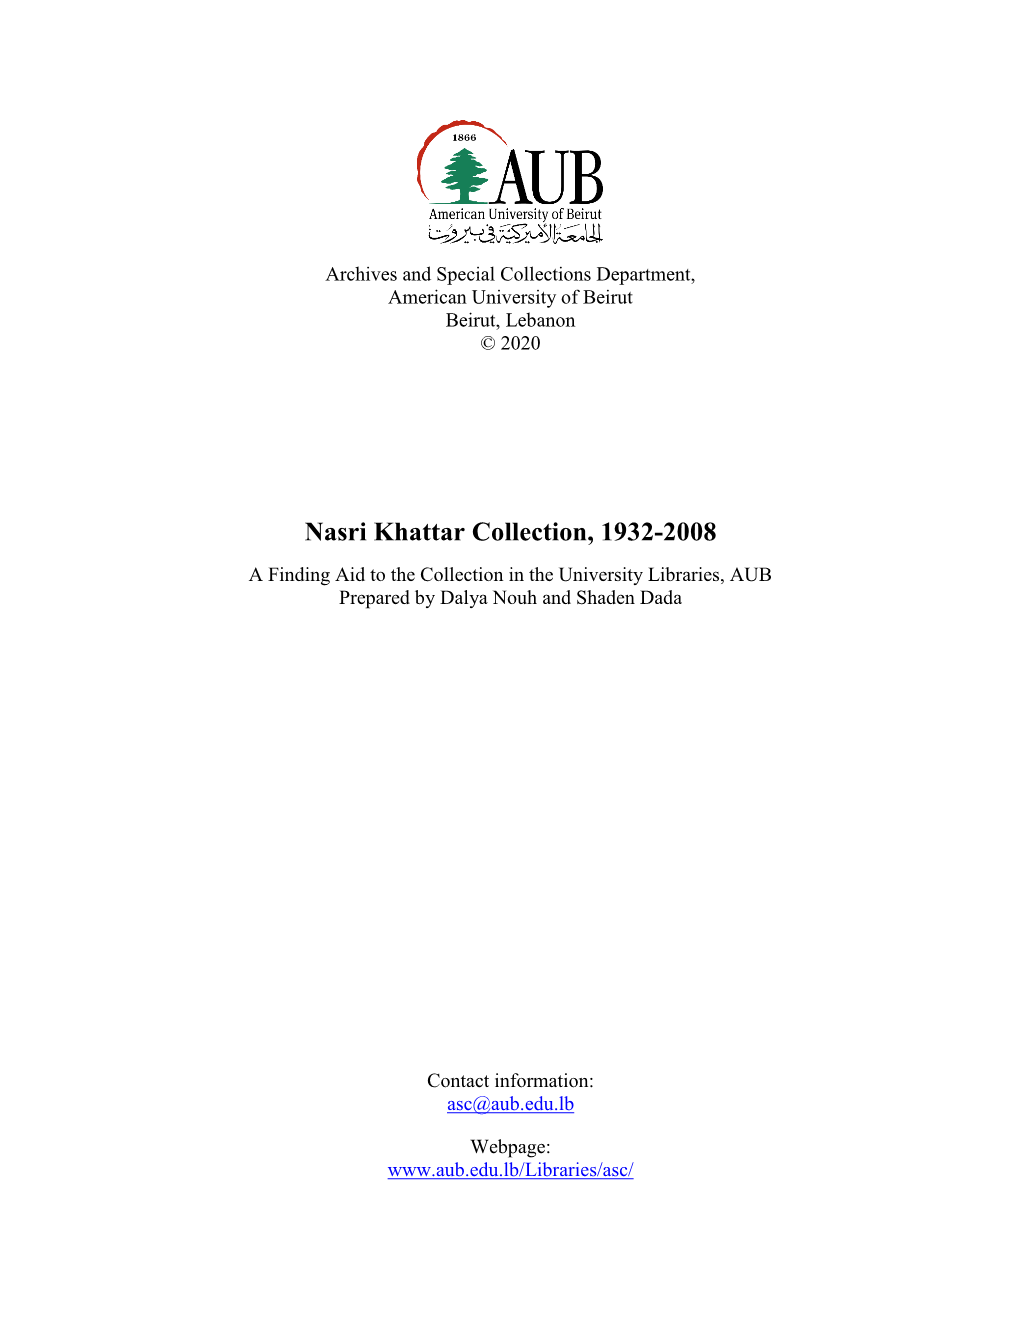 Nasri Khattar Collection, 1932-2008 a Finding Aid to the Collection in the University Libraries, AUB Prepared by Dalya Nouh and Shaden Dada